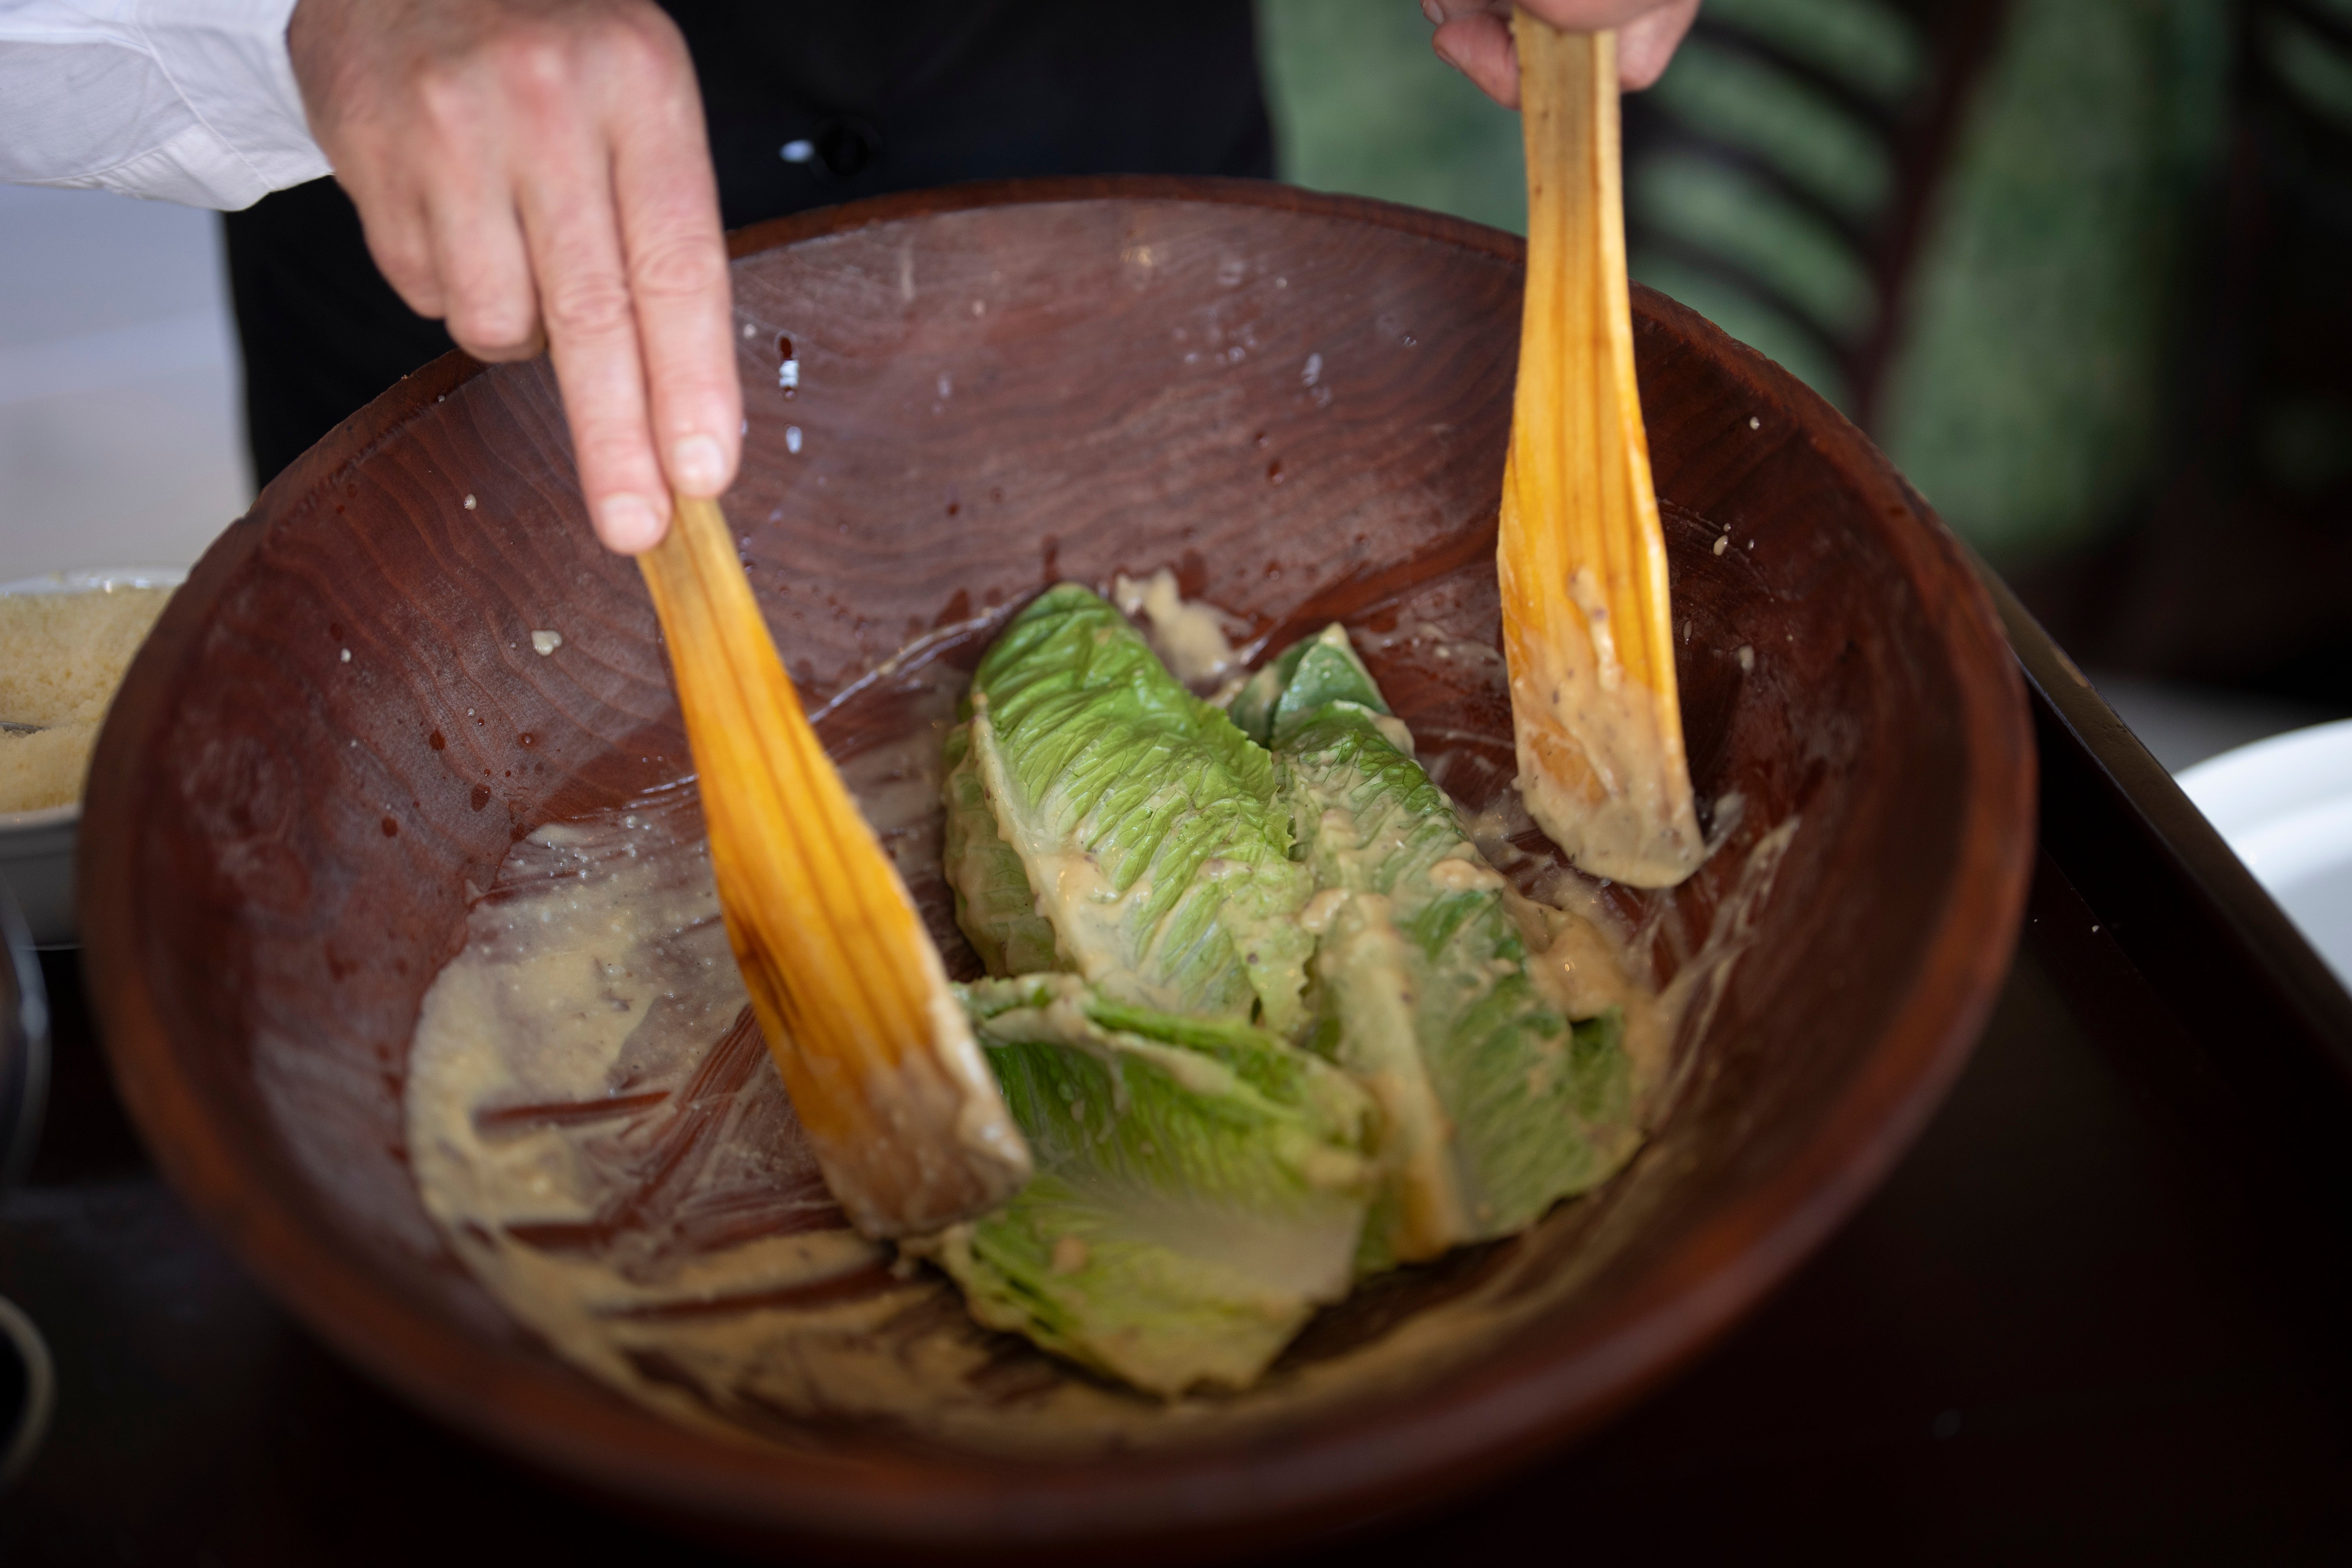 Salad Master Efrain Montoya mixes Romaine leaves with other ingredients as he prepares a Caesar salad